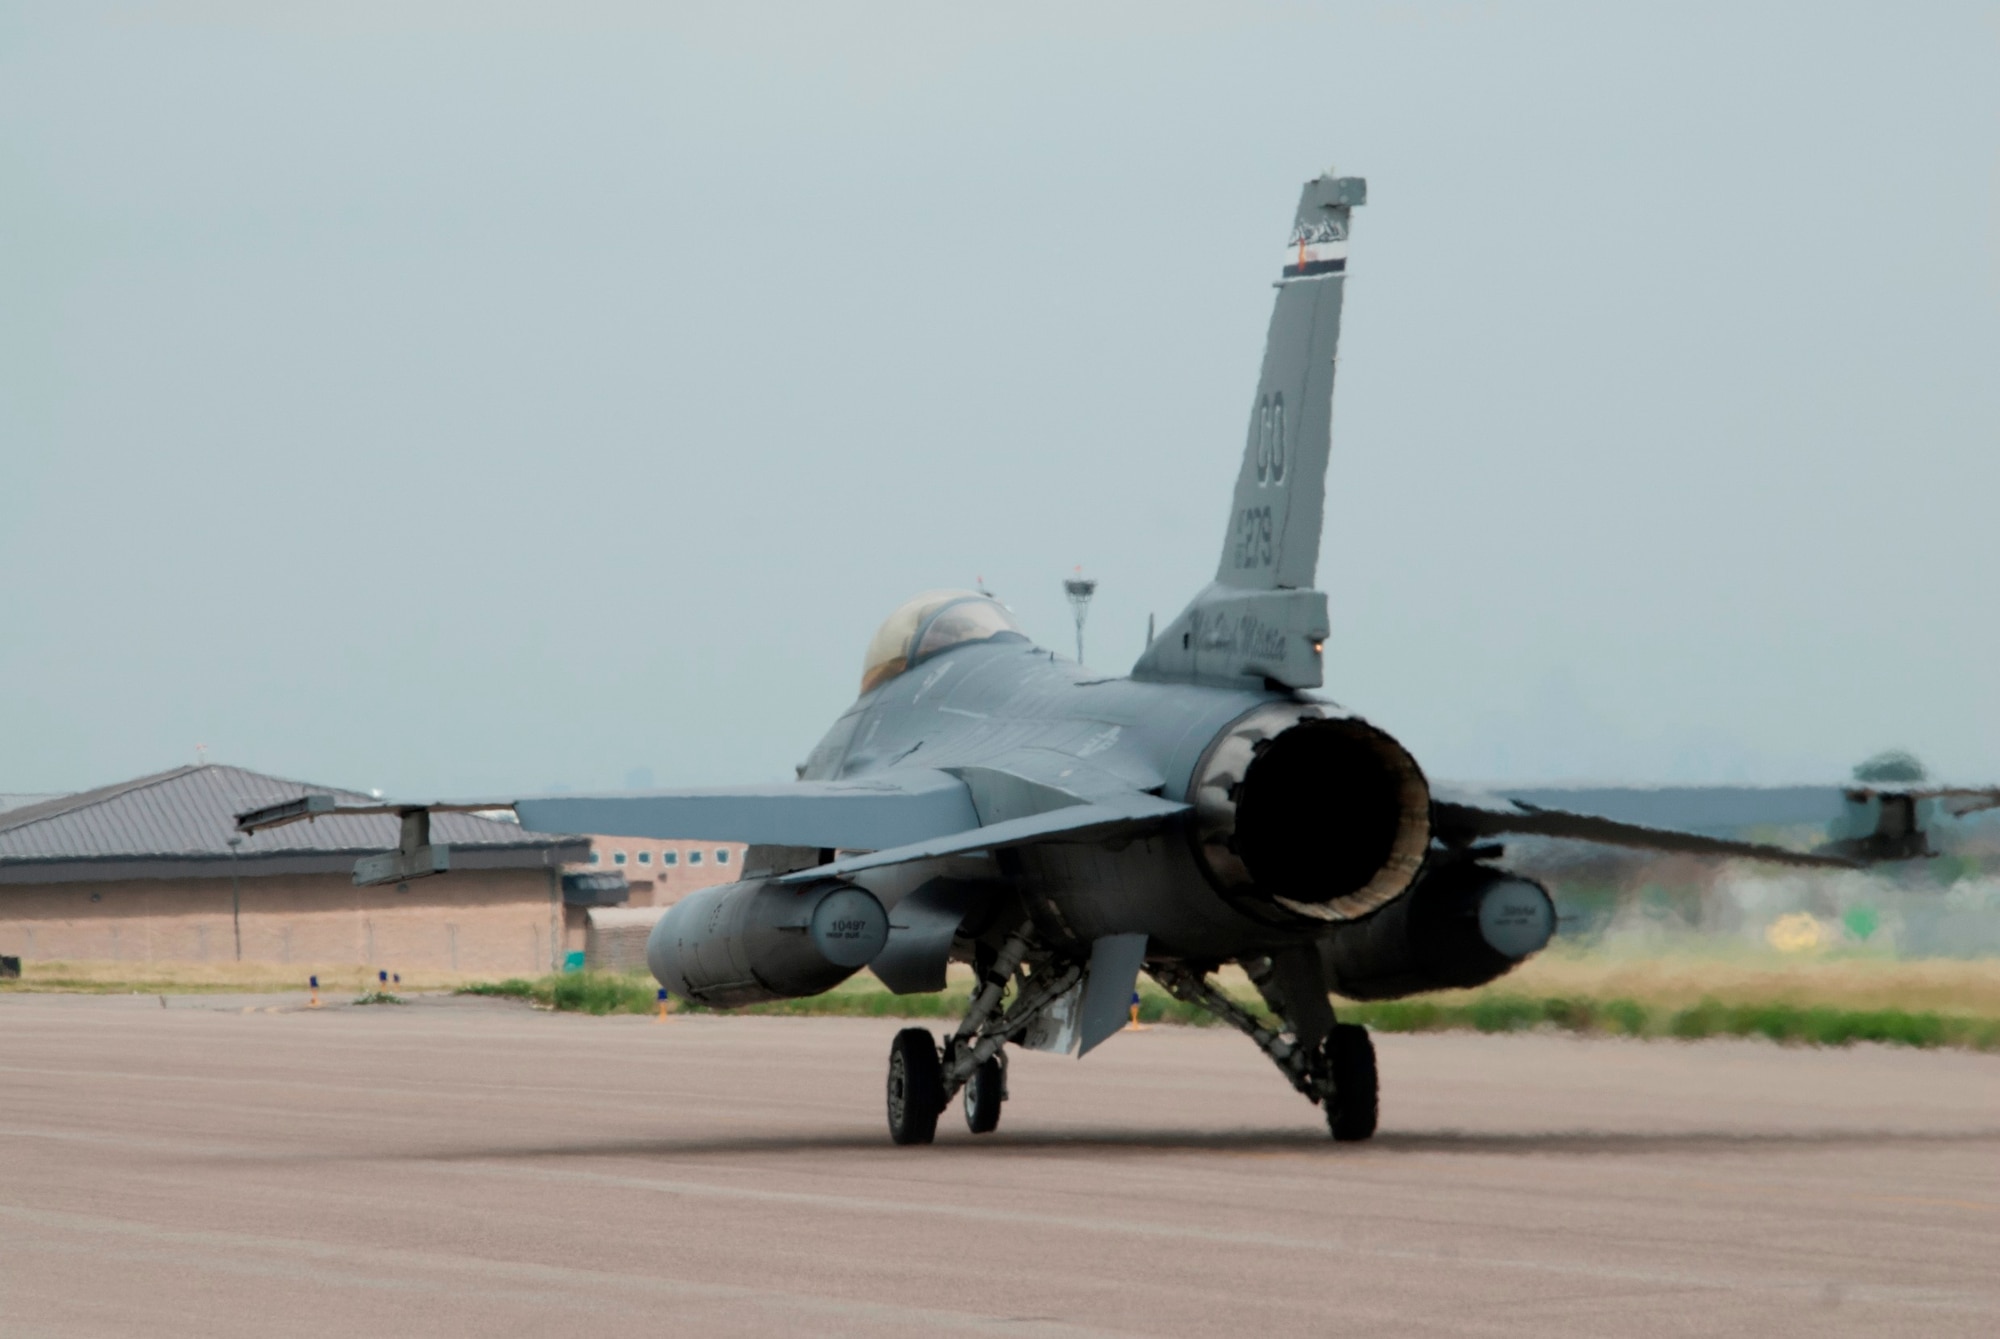 Colorado Air National Guard F-16s return home to Buckley Air Force Base after being housed temporarily at Denver International Airport for the last three months, Buckley AFB, Aurora Colo., July 12, 2014. The partnership between DIA and the COANG  allowed necessary runway reconstruction at Buckley AFB to take place while also providing F-16 pilots the opportunity to continue their 24/7 alert mission and vital training flights twice a day at DIA. Construction on the runway will continue through September, however the airfield is back to operational status. (U.S. Air National Guard photo by Senior Airman Michelle Y. Alvarez-Rea)